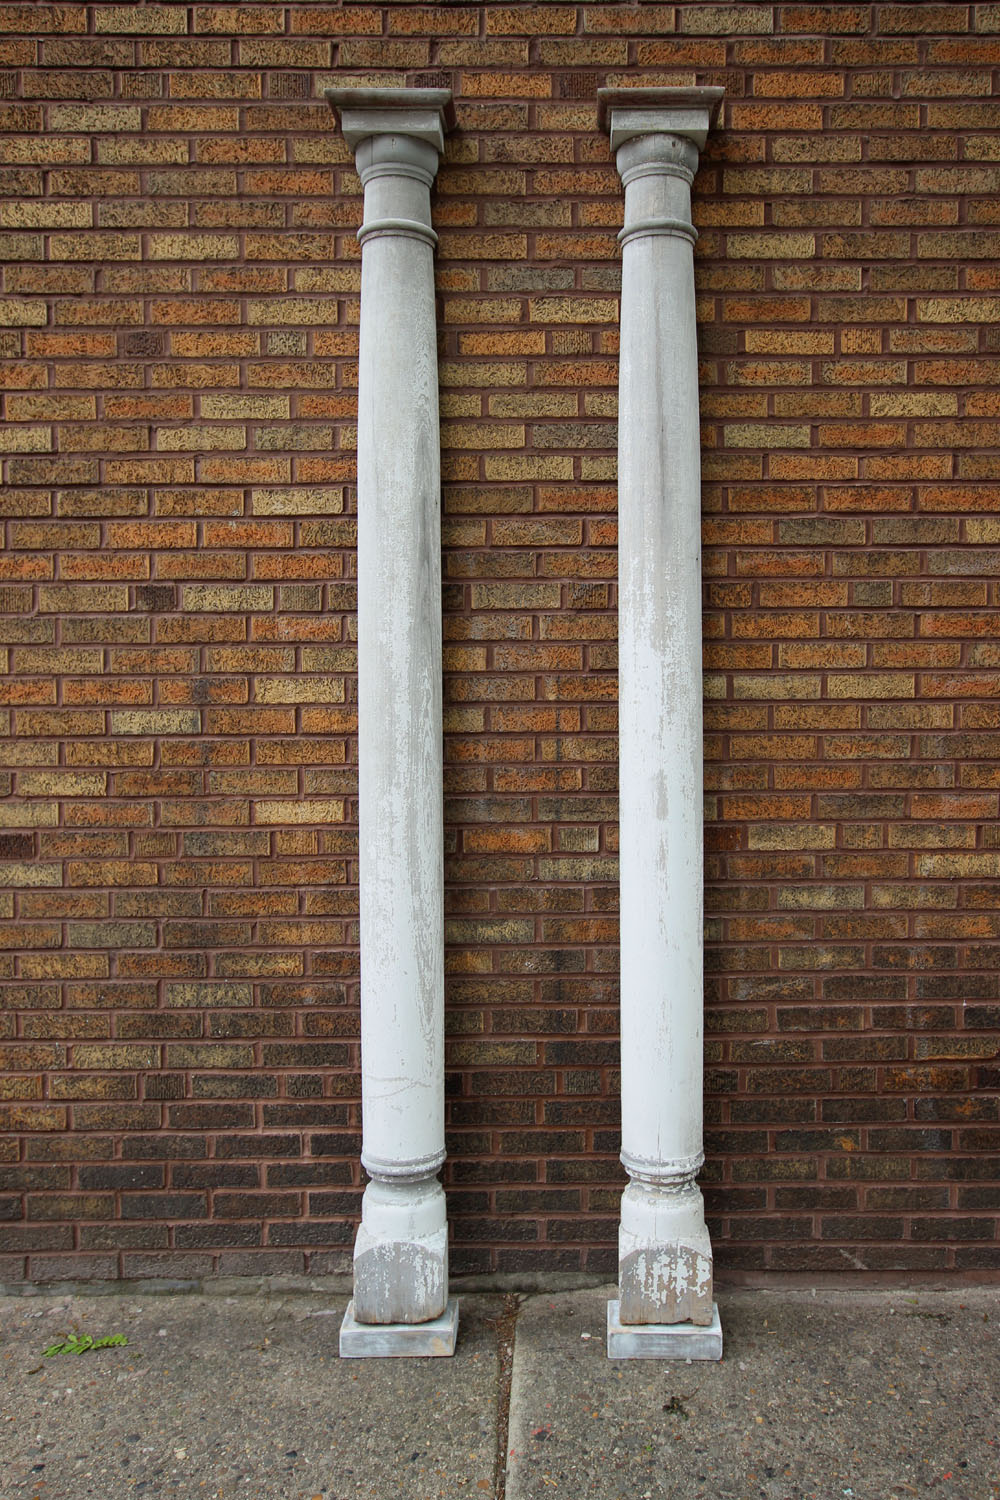 Tall Pair of Architectural Pilasters, Original Weathered PaintAmerican